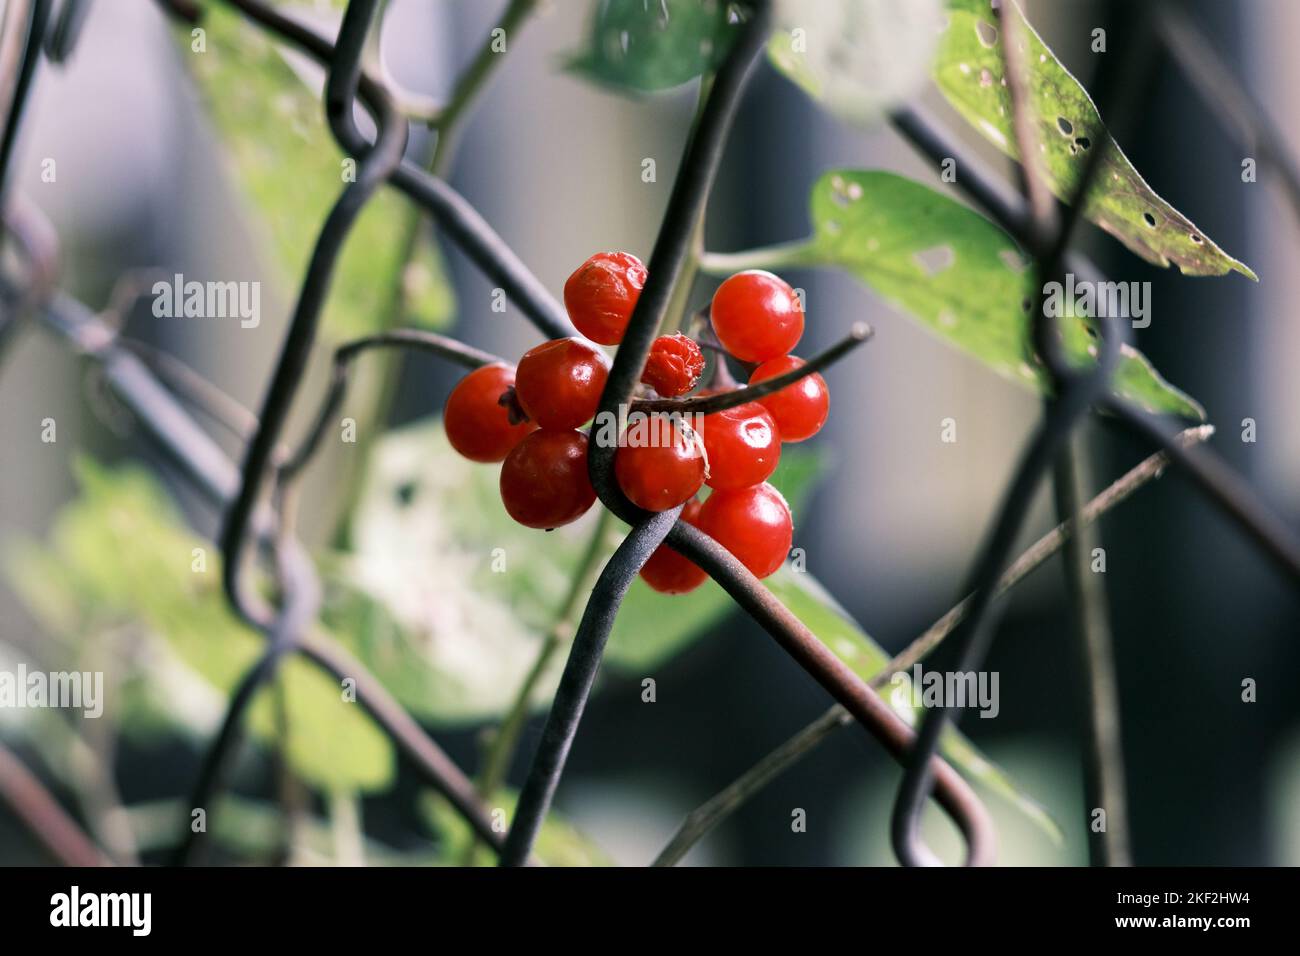 Vibrant, red berries growing on metal fence. Contrast between green leaves and metal fence. Bright red. Technology V nature Stock Photo